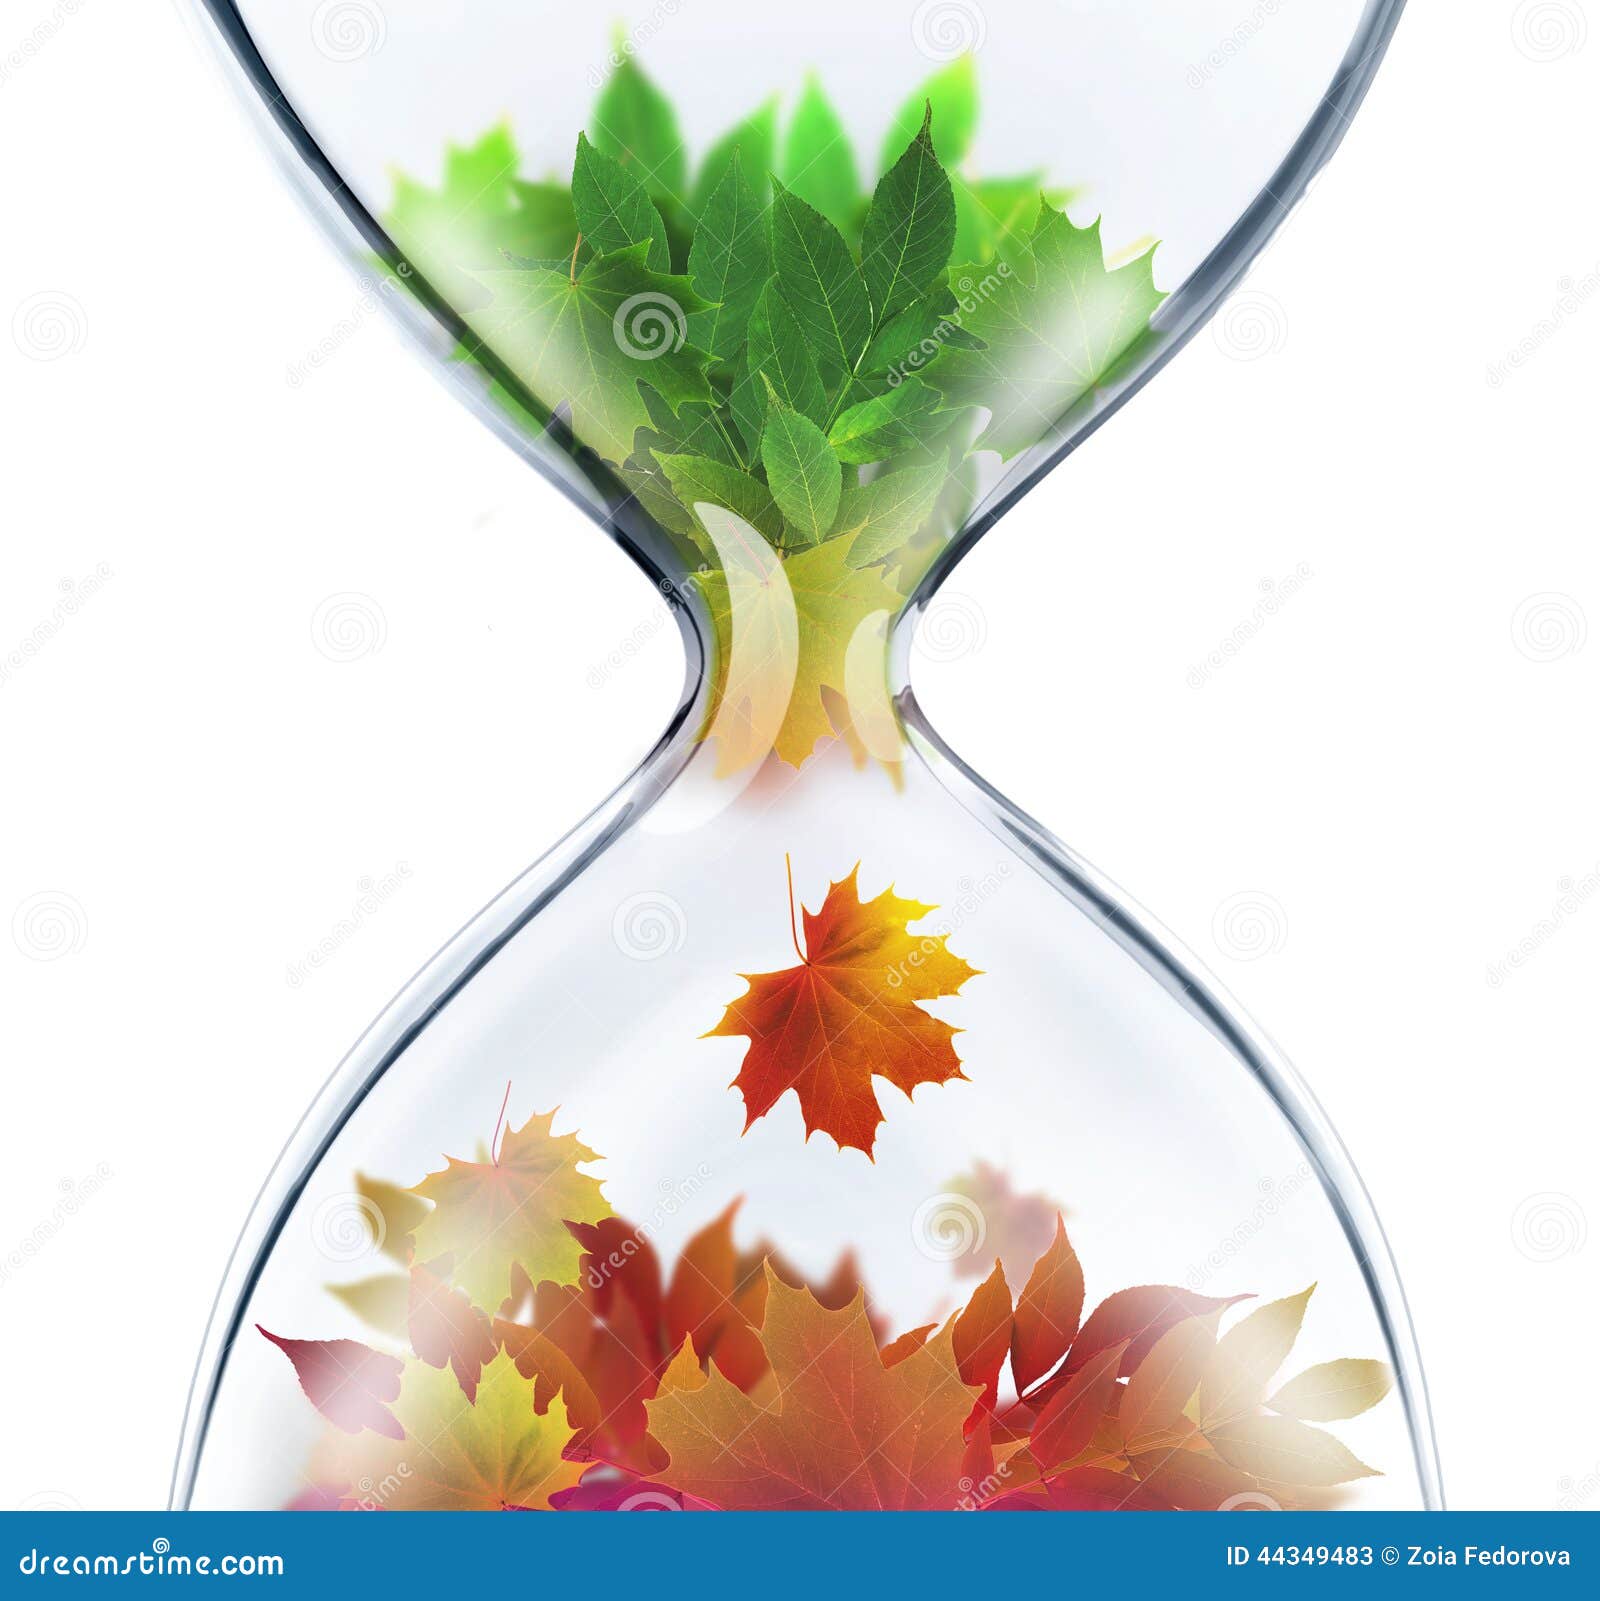 The Changing Seasons Concept Stock Illustration - Illustration of